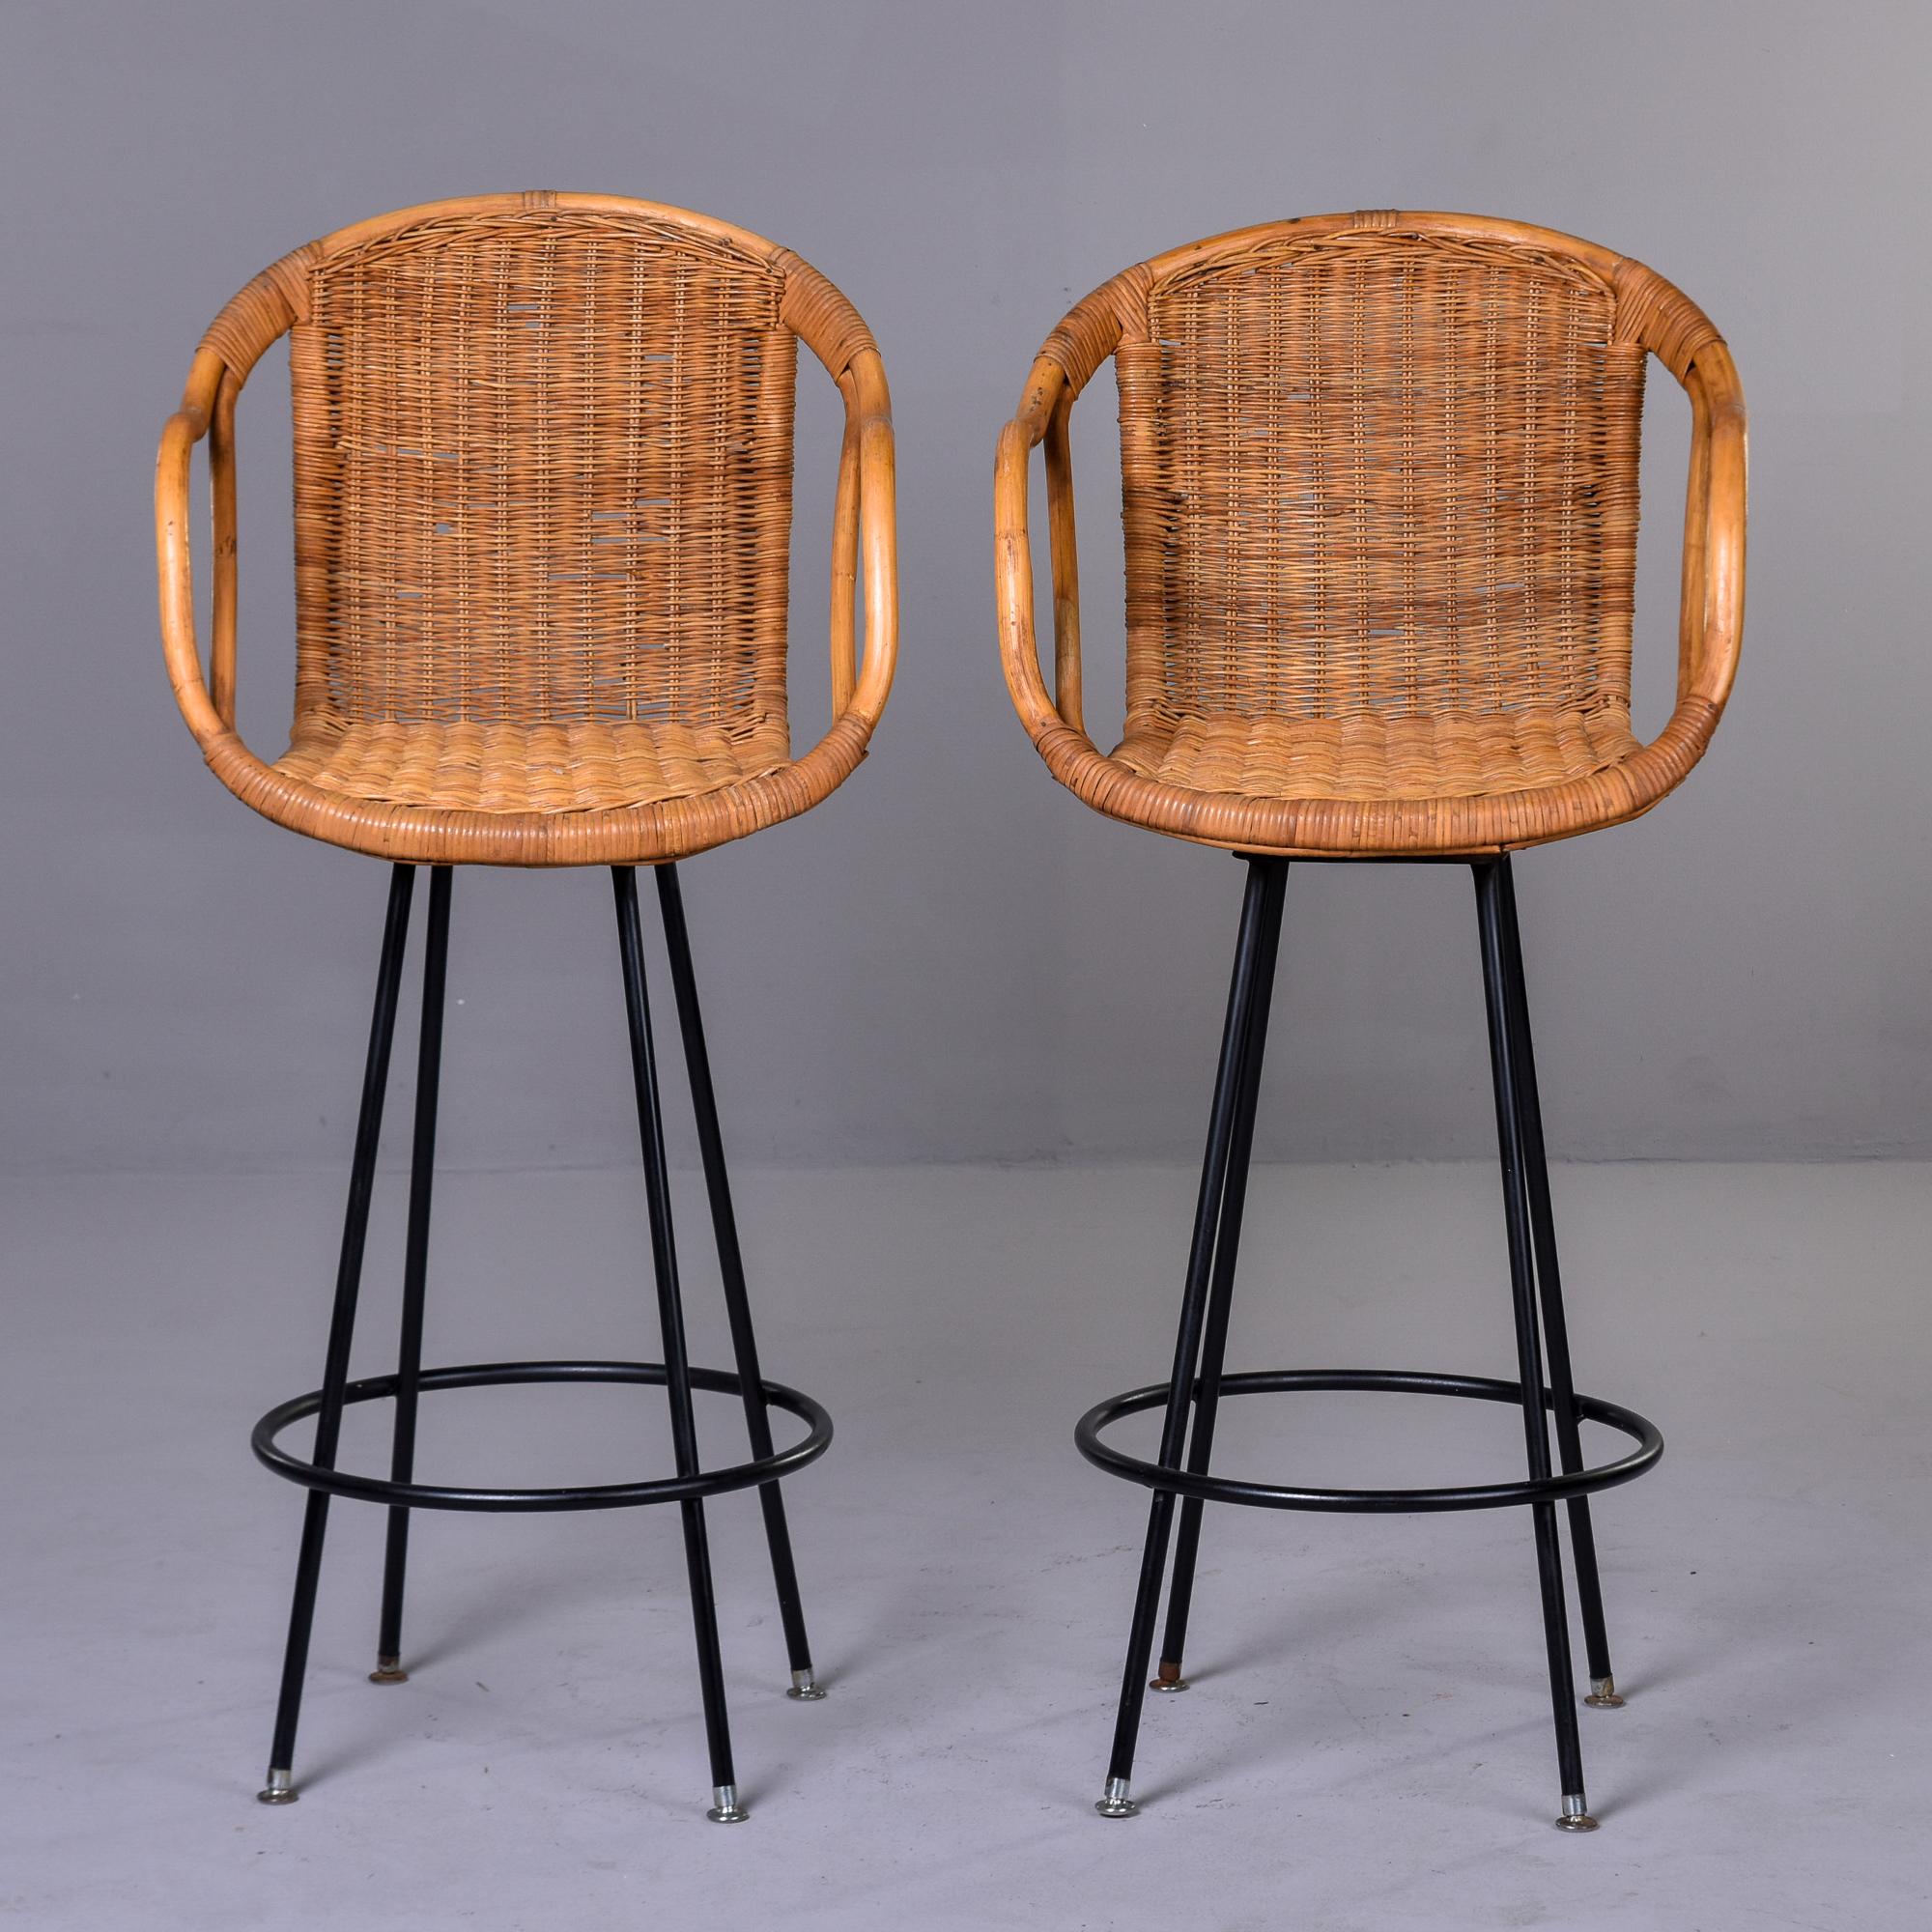 Found in the US, this pair of woven wicker bar height swivel stools date from the early 1960s. Four slender black metal legged base with a round foot rest. Seats are a rounded scoop shape with curved arm rests and cut out sides. Unknown maker. Sold